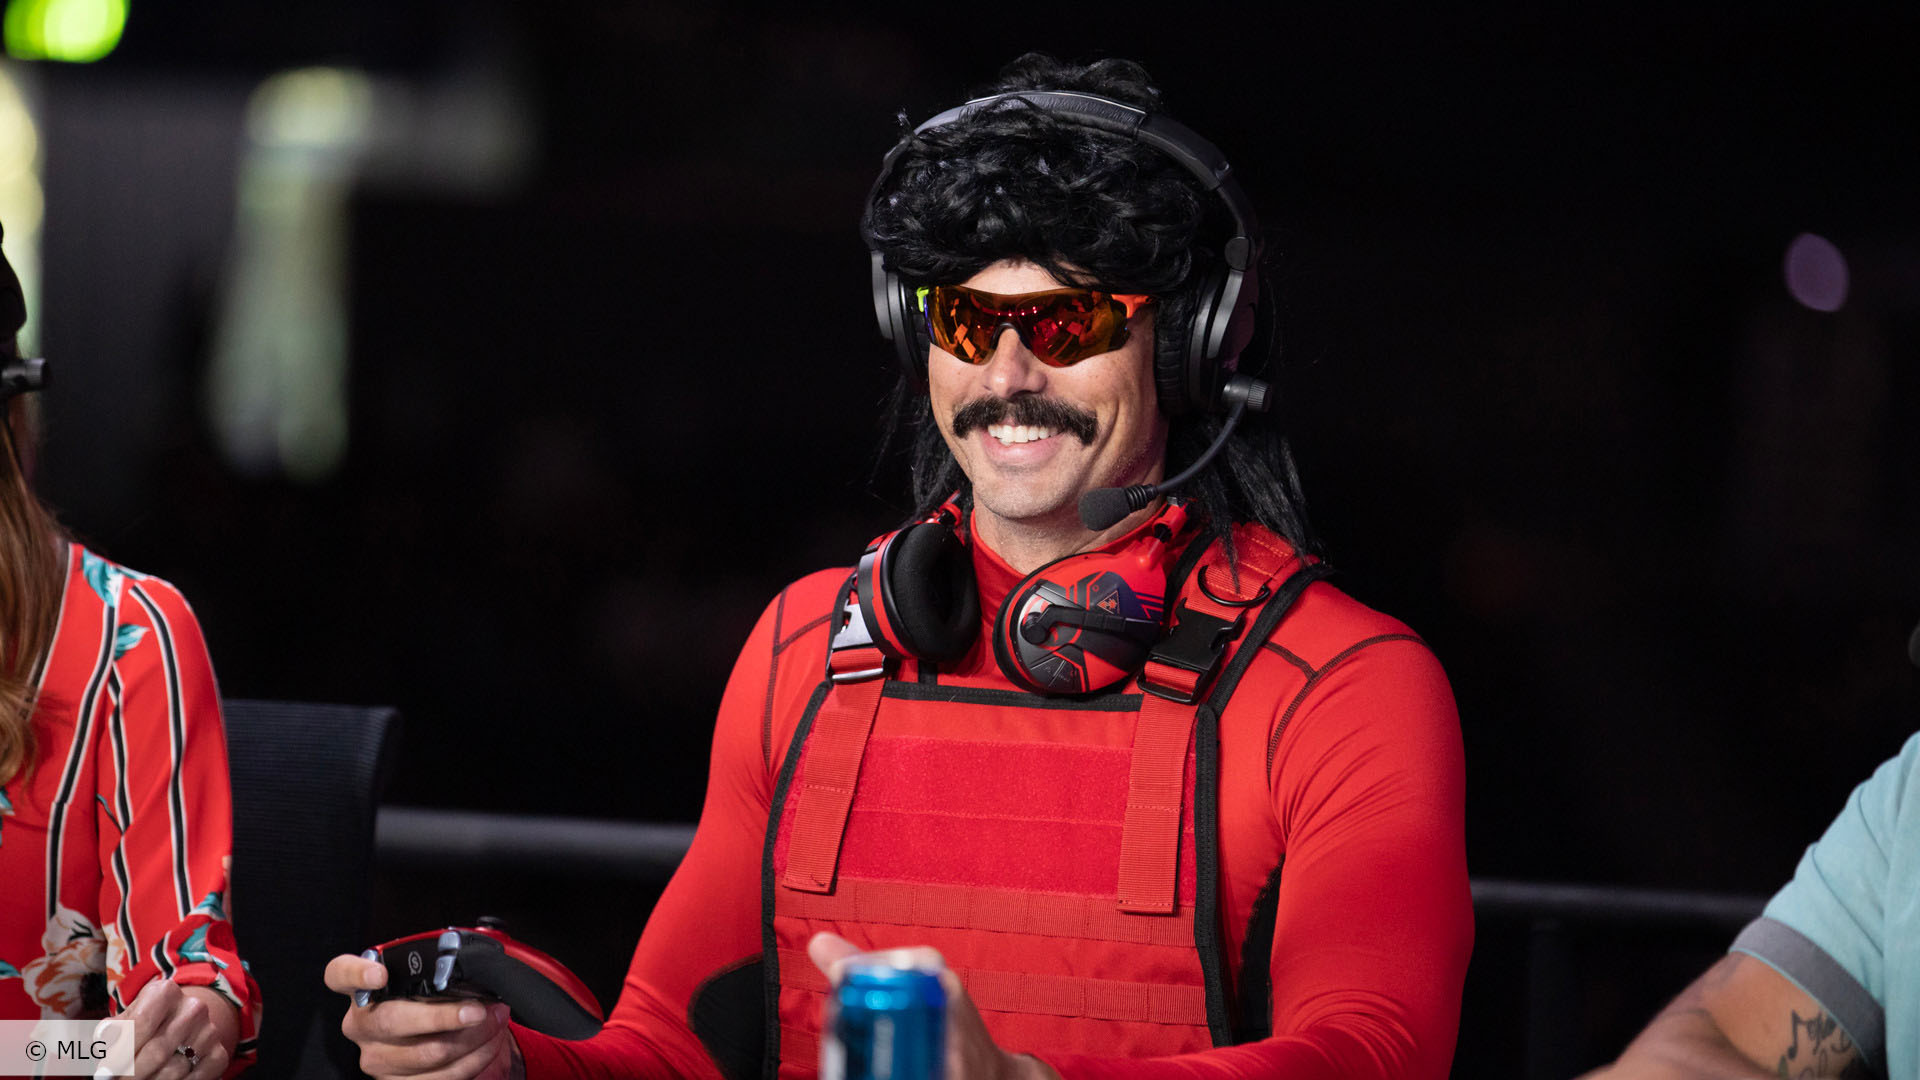 Dr Disrespect confirms Twitch cut ties due to his messages to a minor